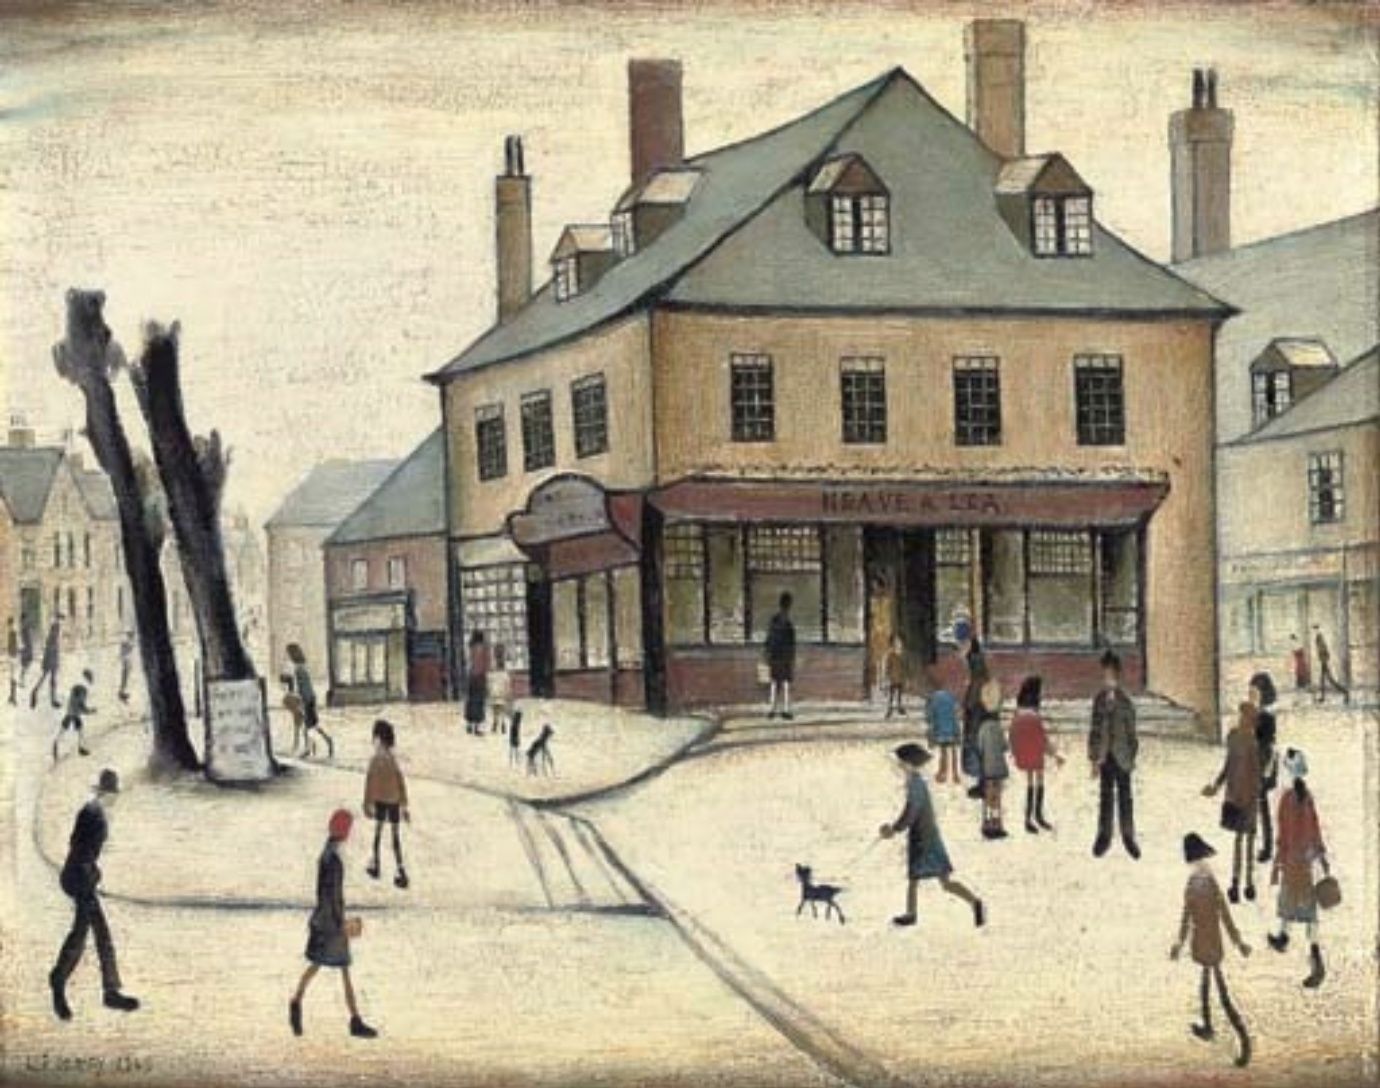 The local store (1949) by Laurence Stephen Lowry (1887 - 1976), English artist.